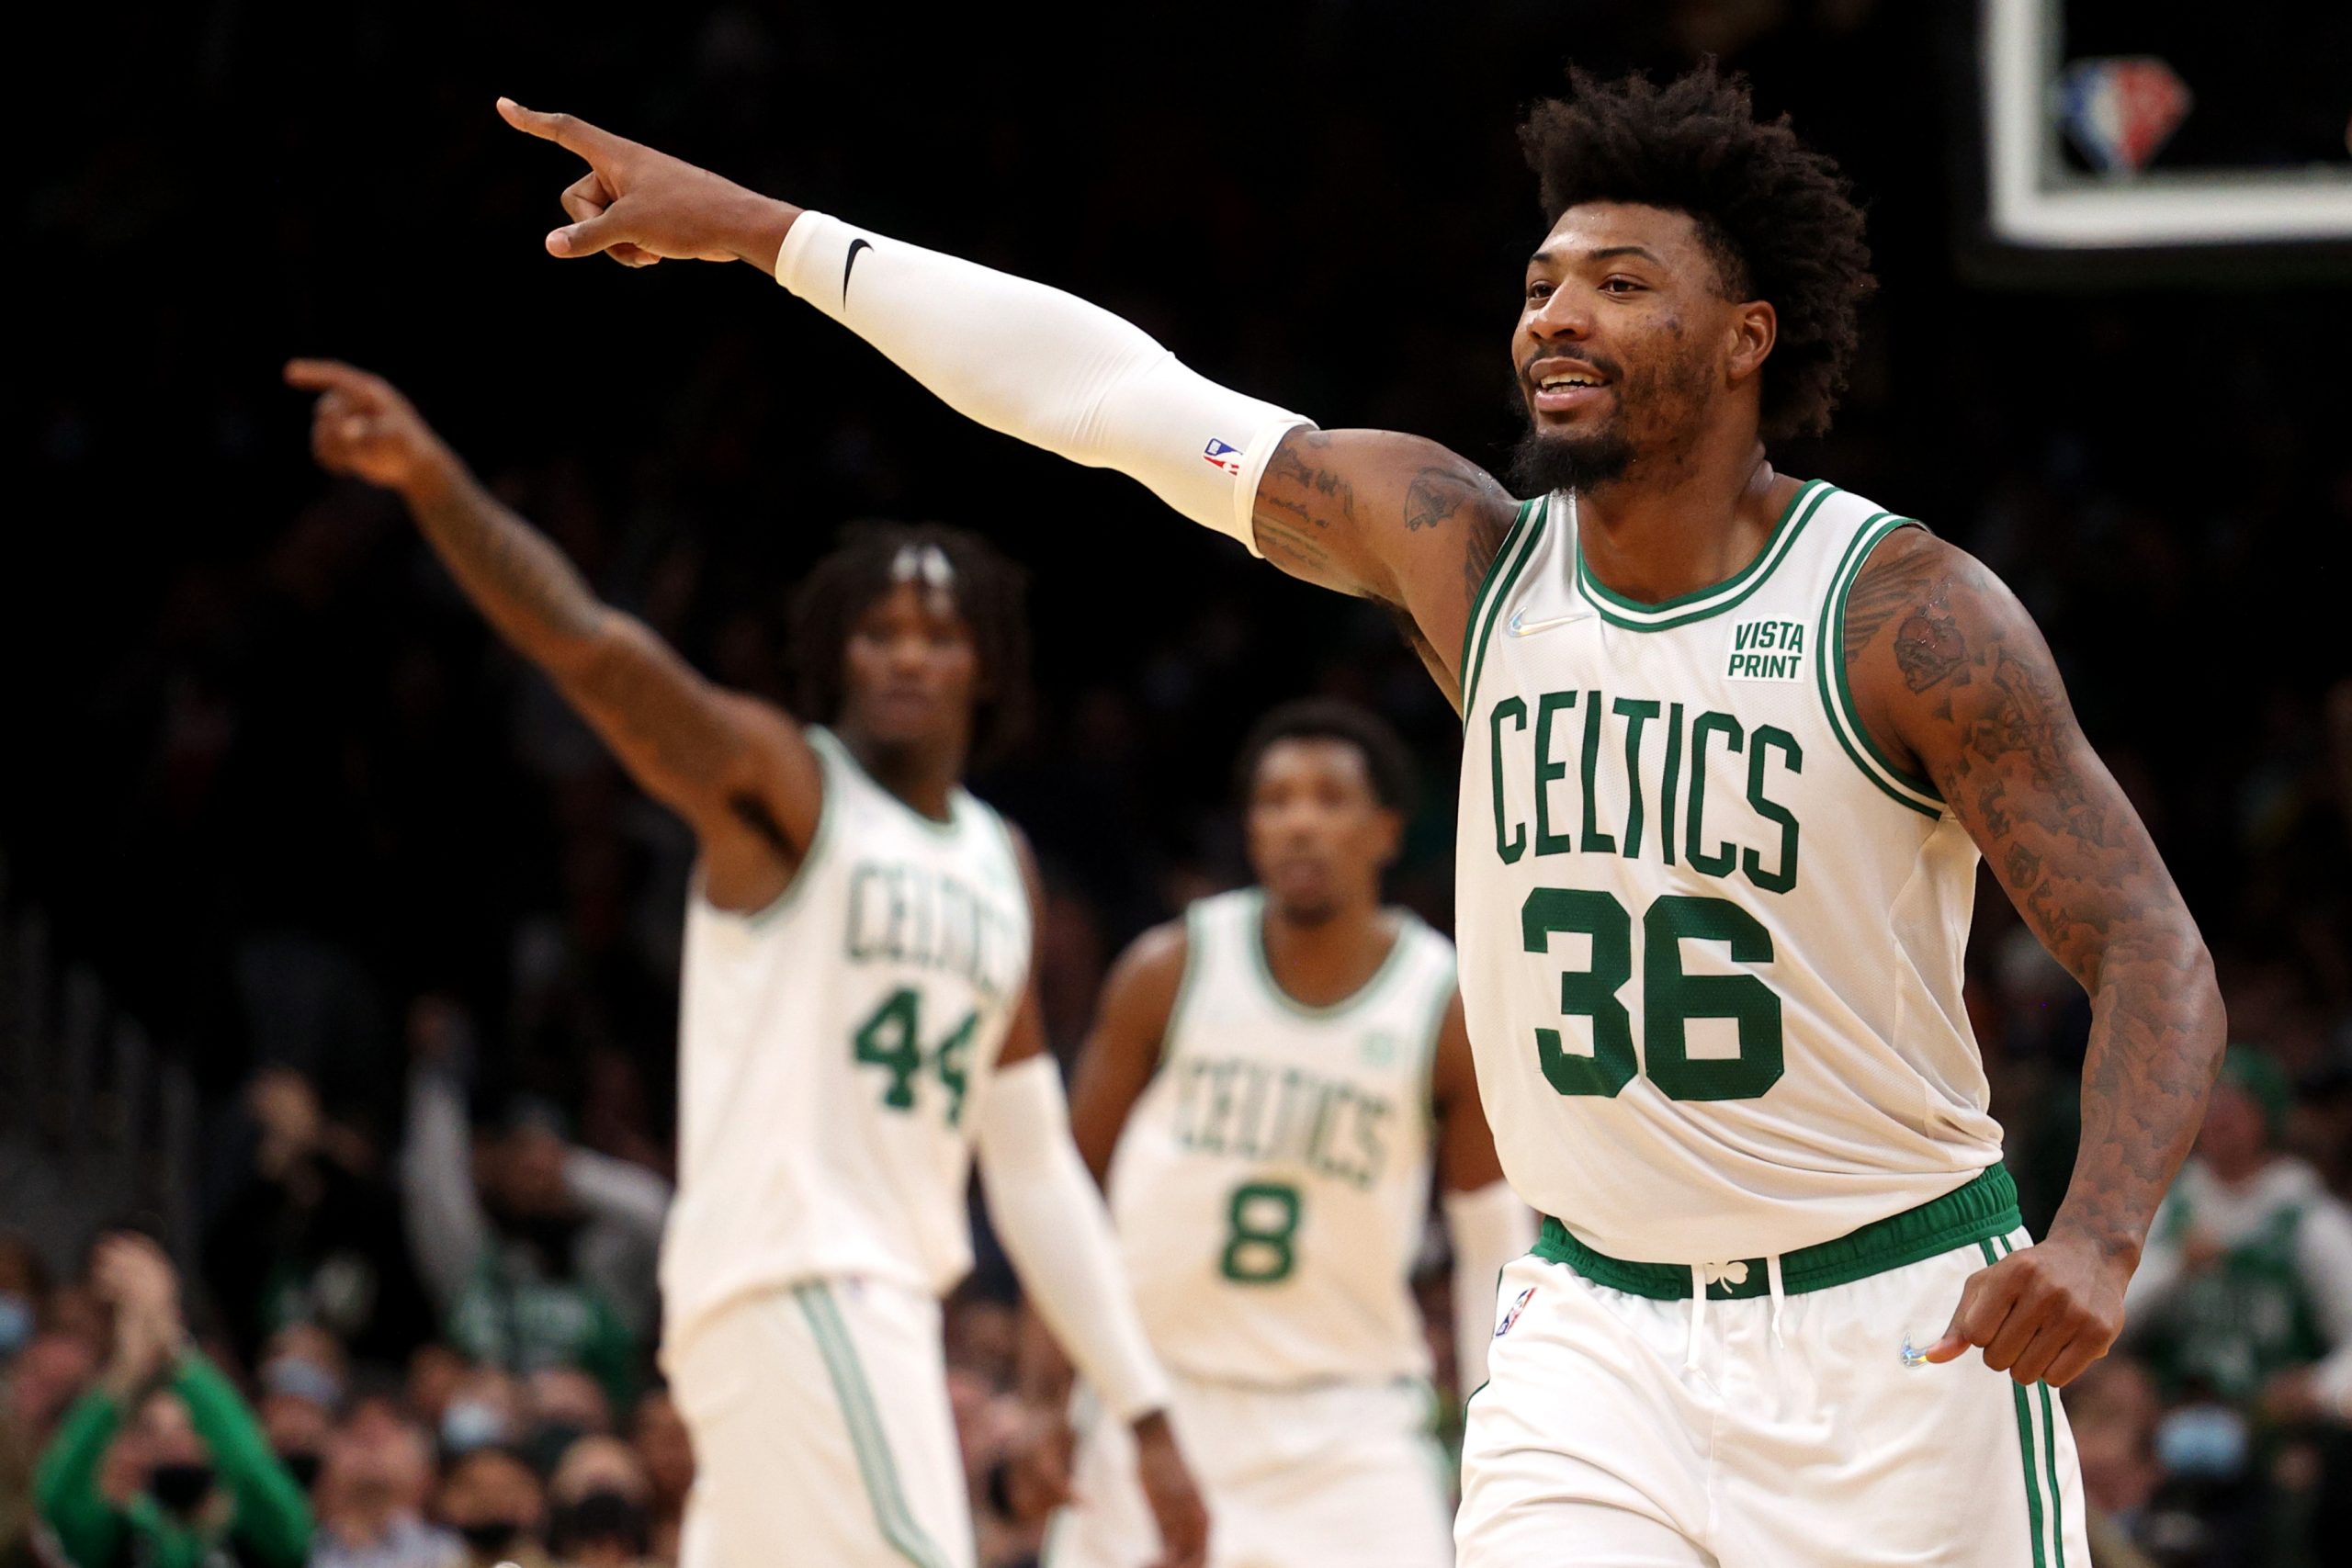 Marcus Smart of the Boston Celtics celebrates during the second half of the game against the Toronto Raptors.